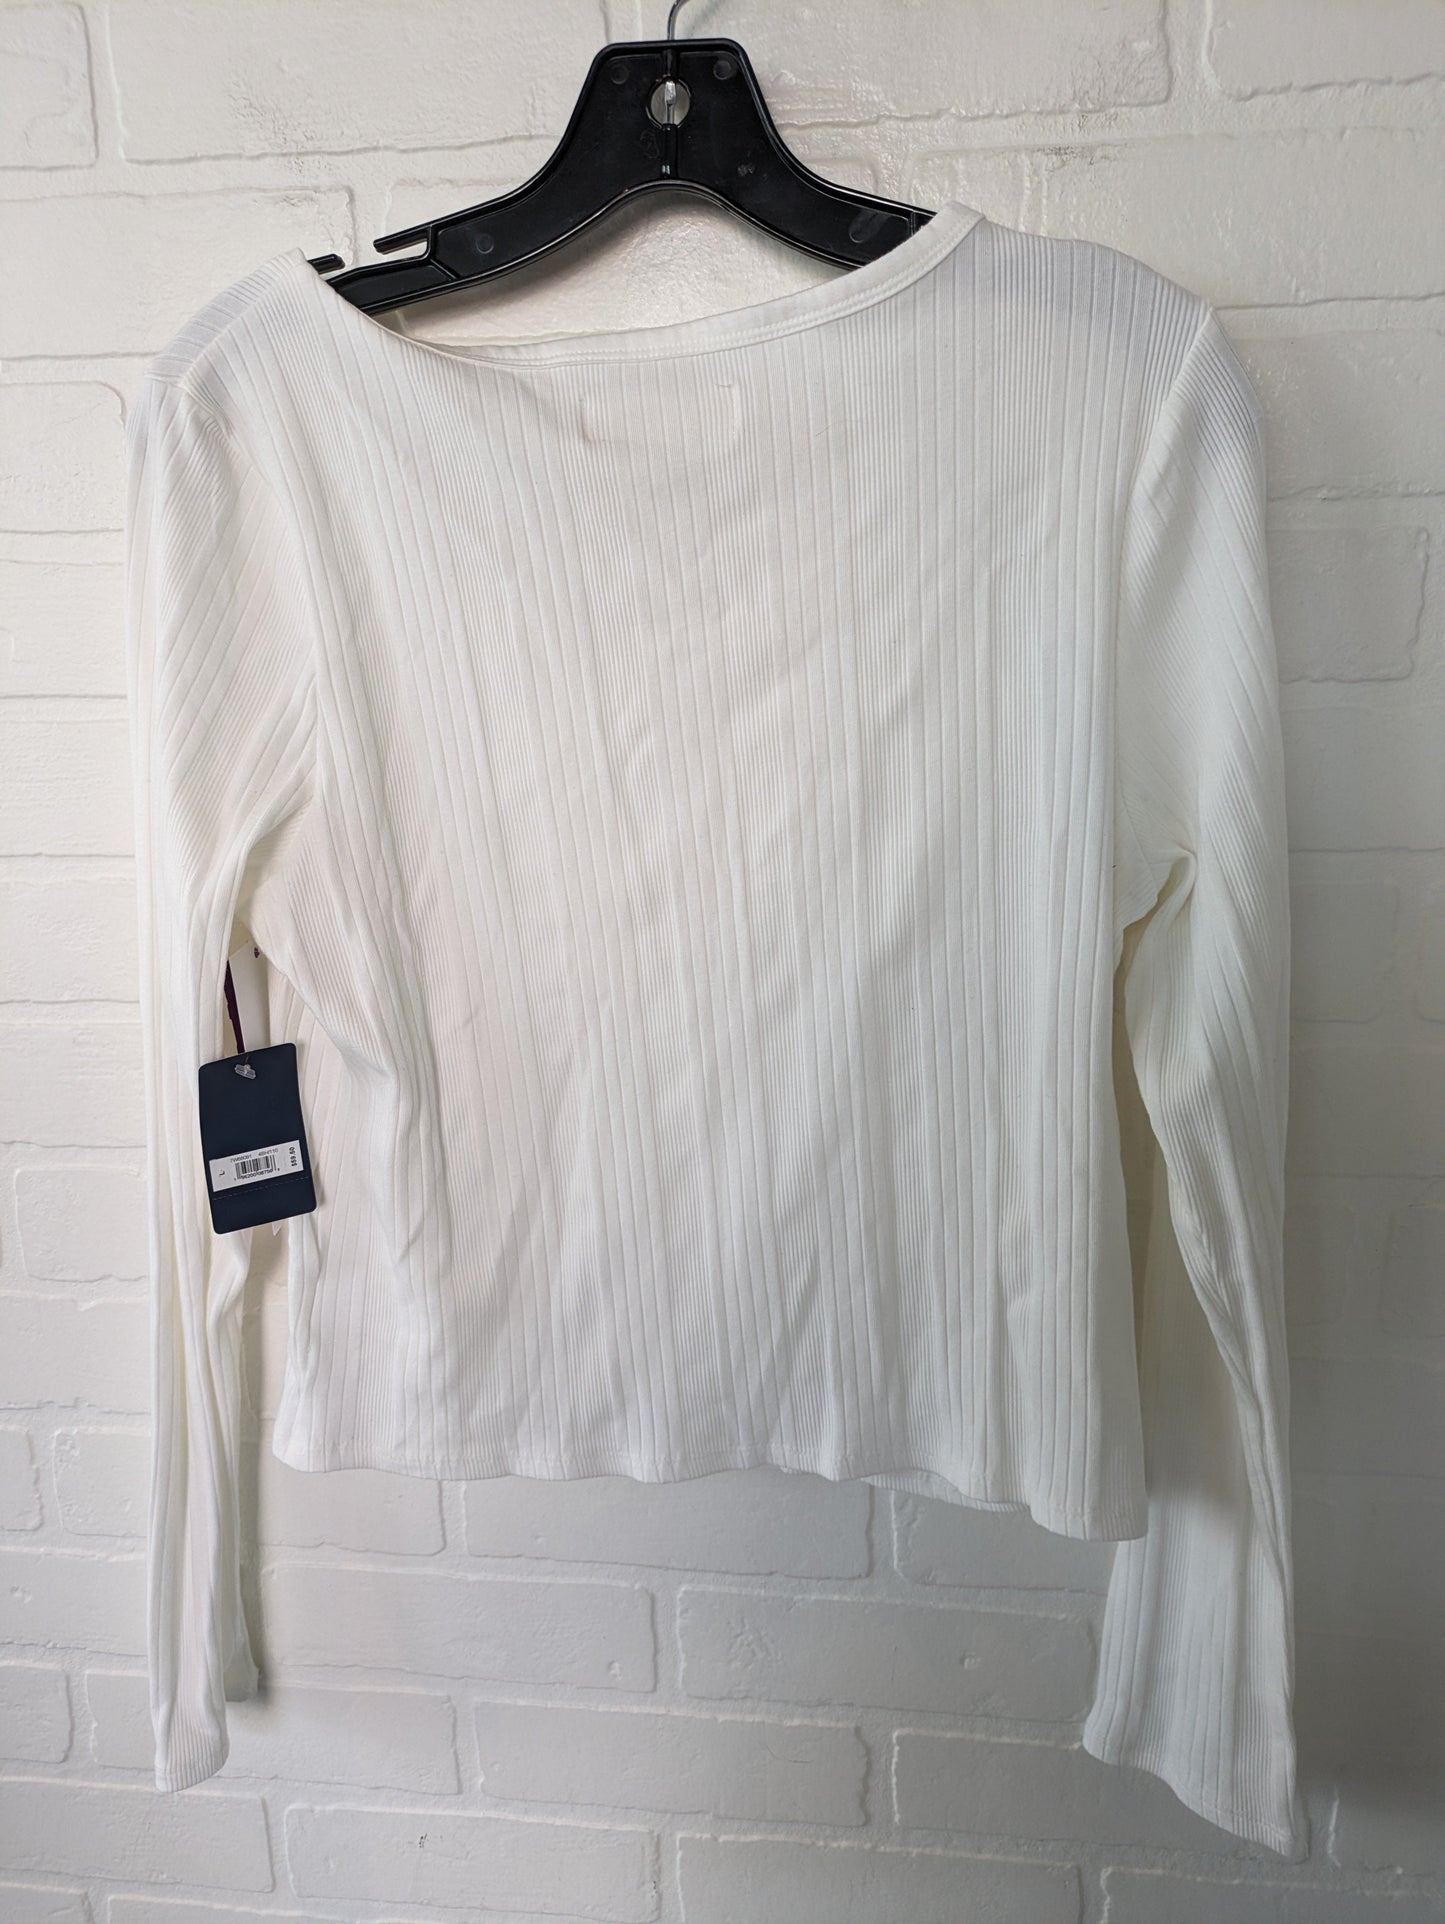 White Top Long Sleeve Lucky Brand, Size L